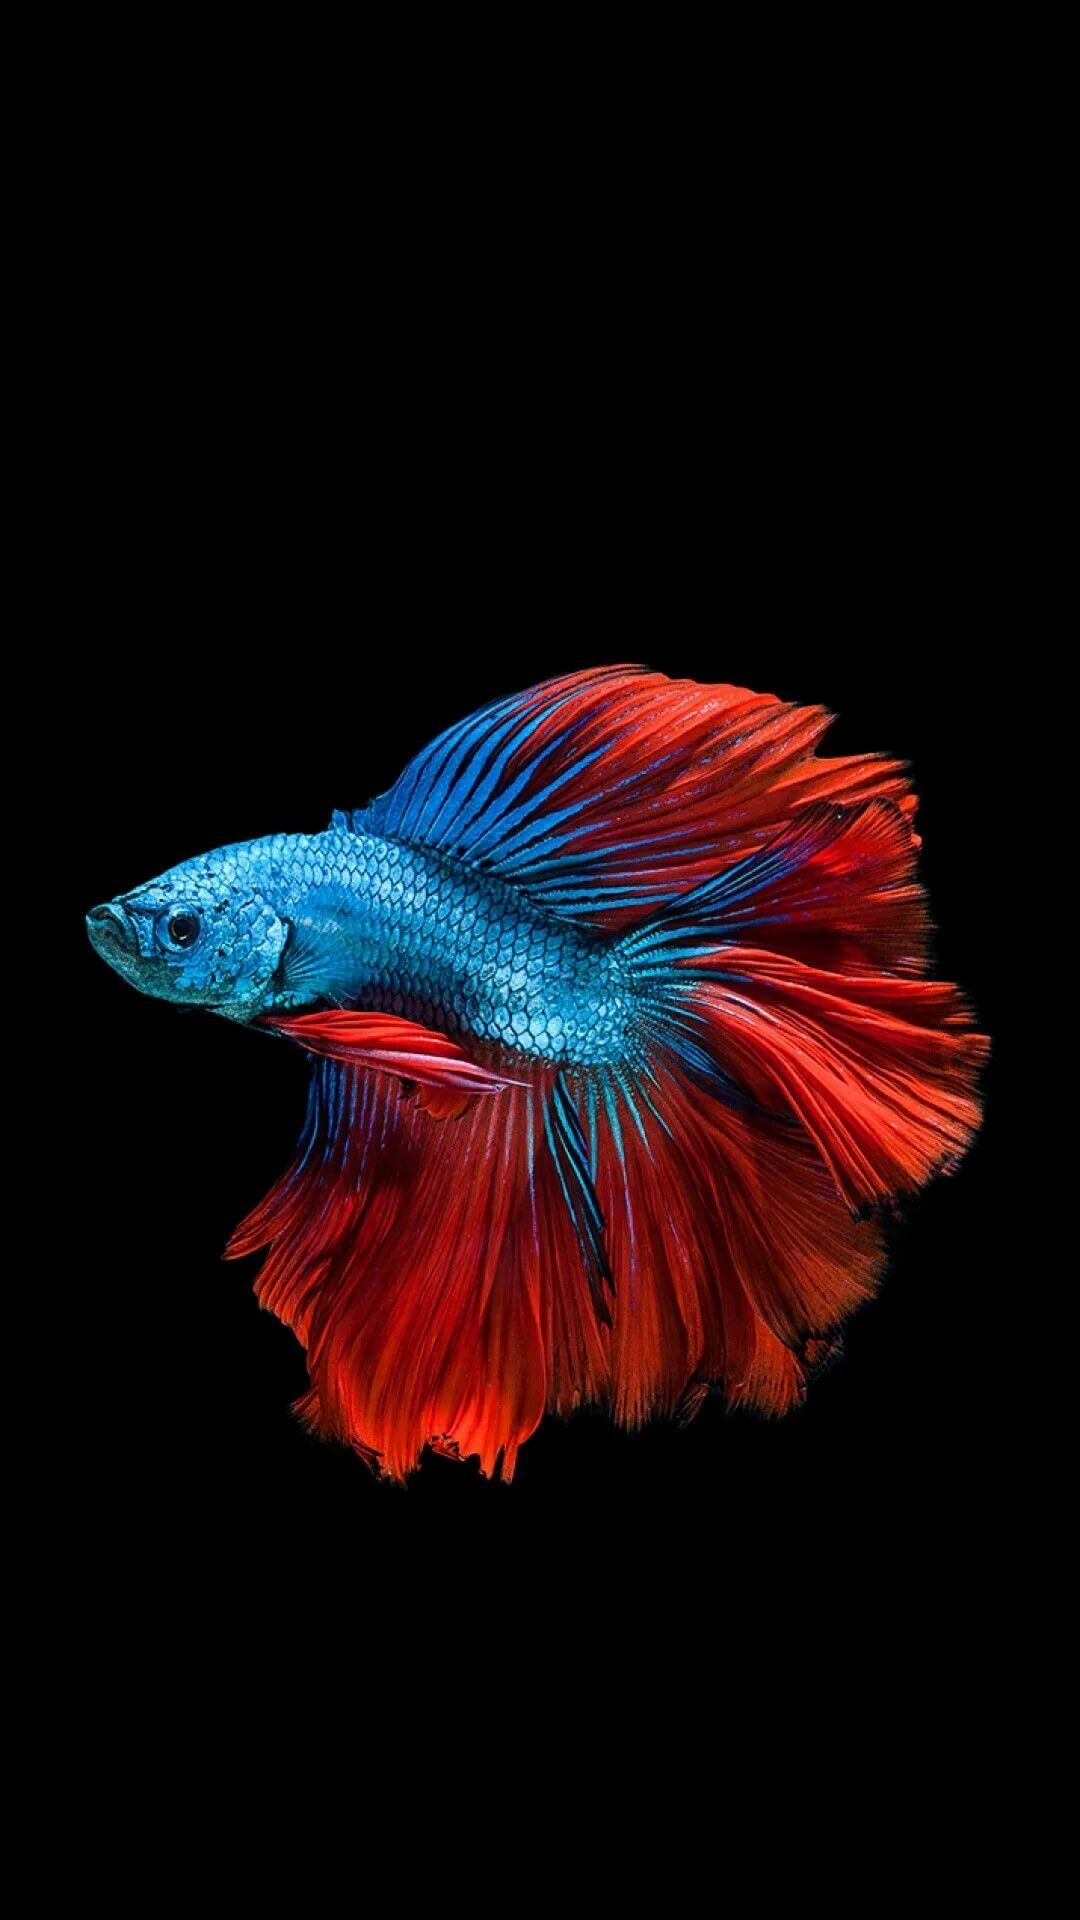 Betta fish iPhone wallpapers, Exquisite aquatic beauty, Mobile exclusives, Colorful fins, 1080x1920 Full HD Phone